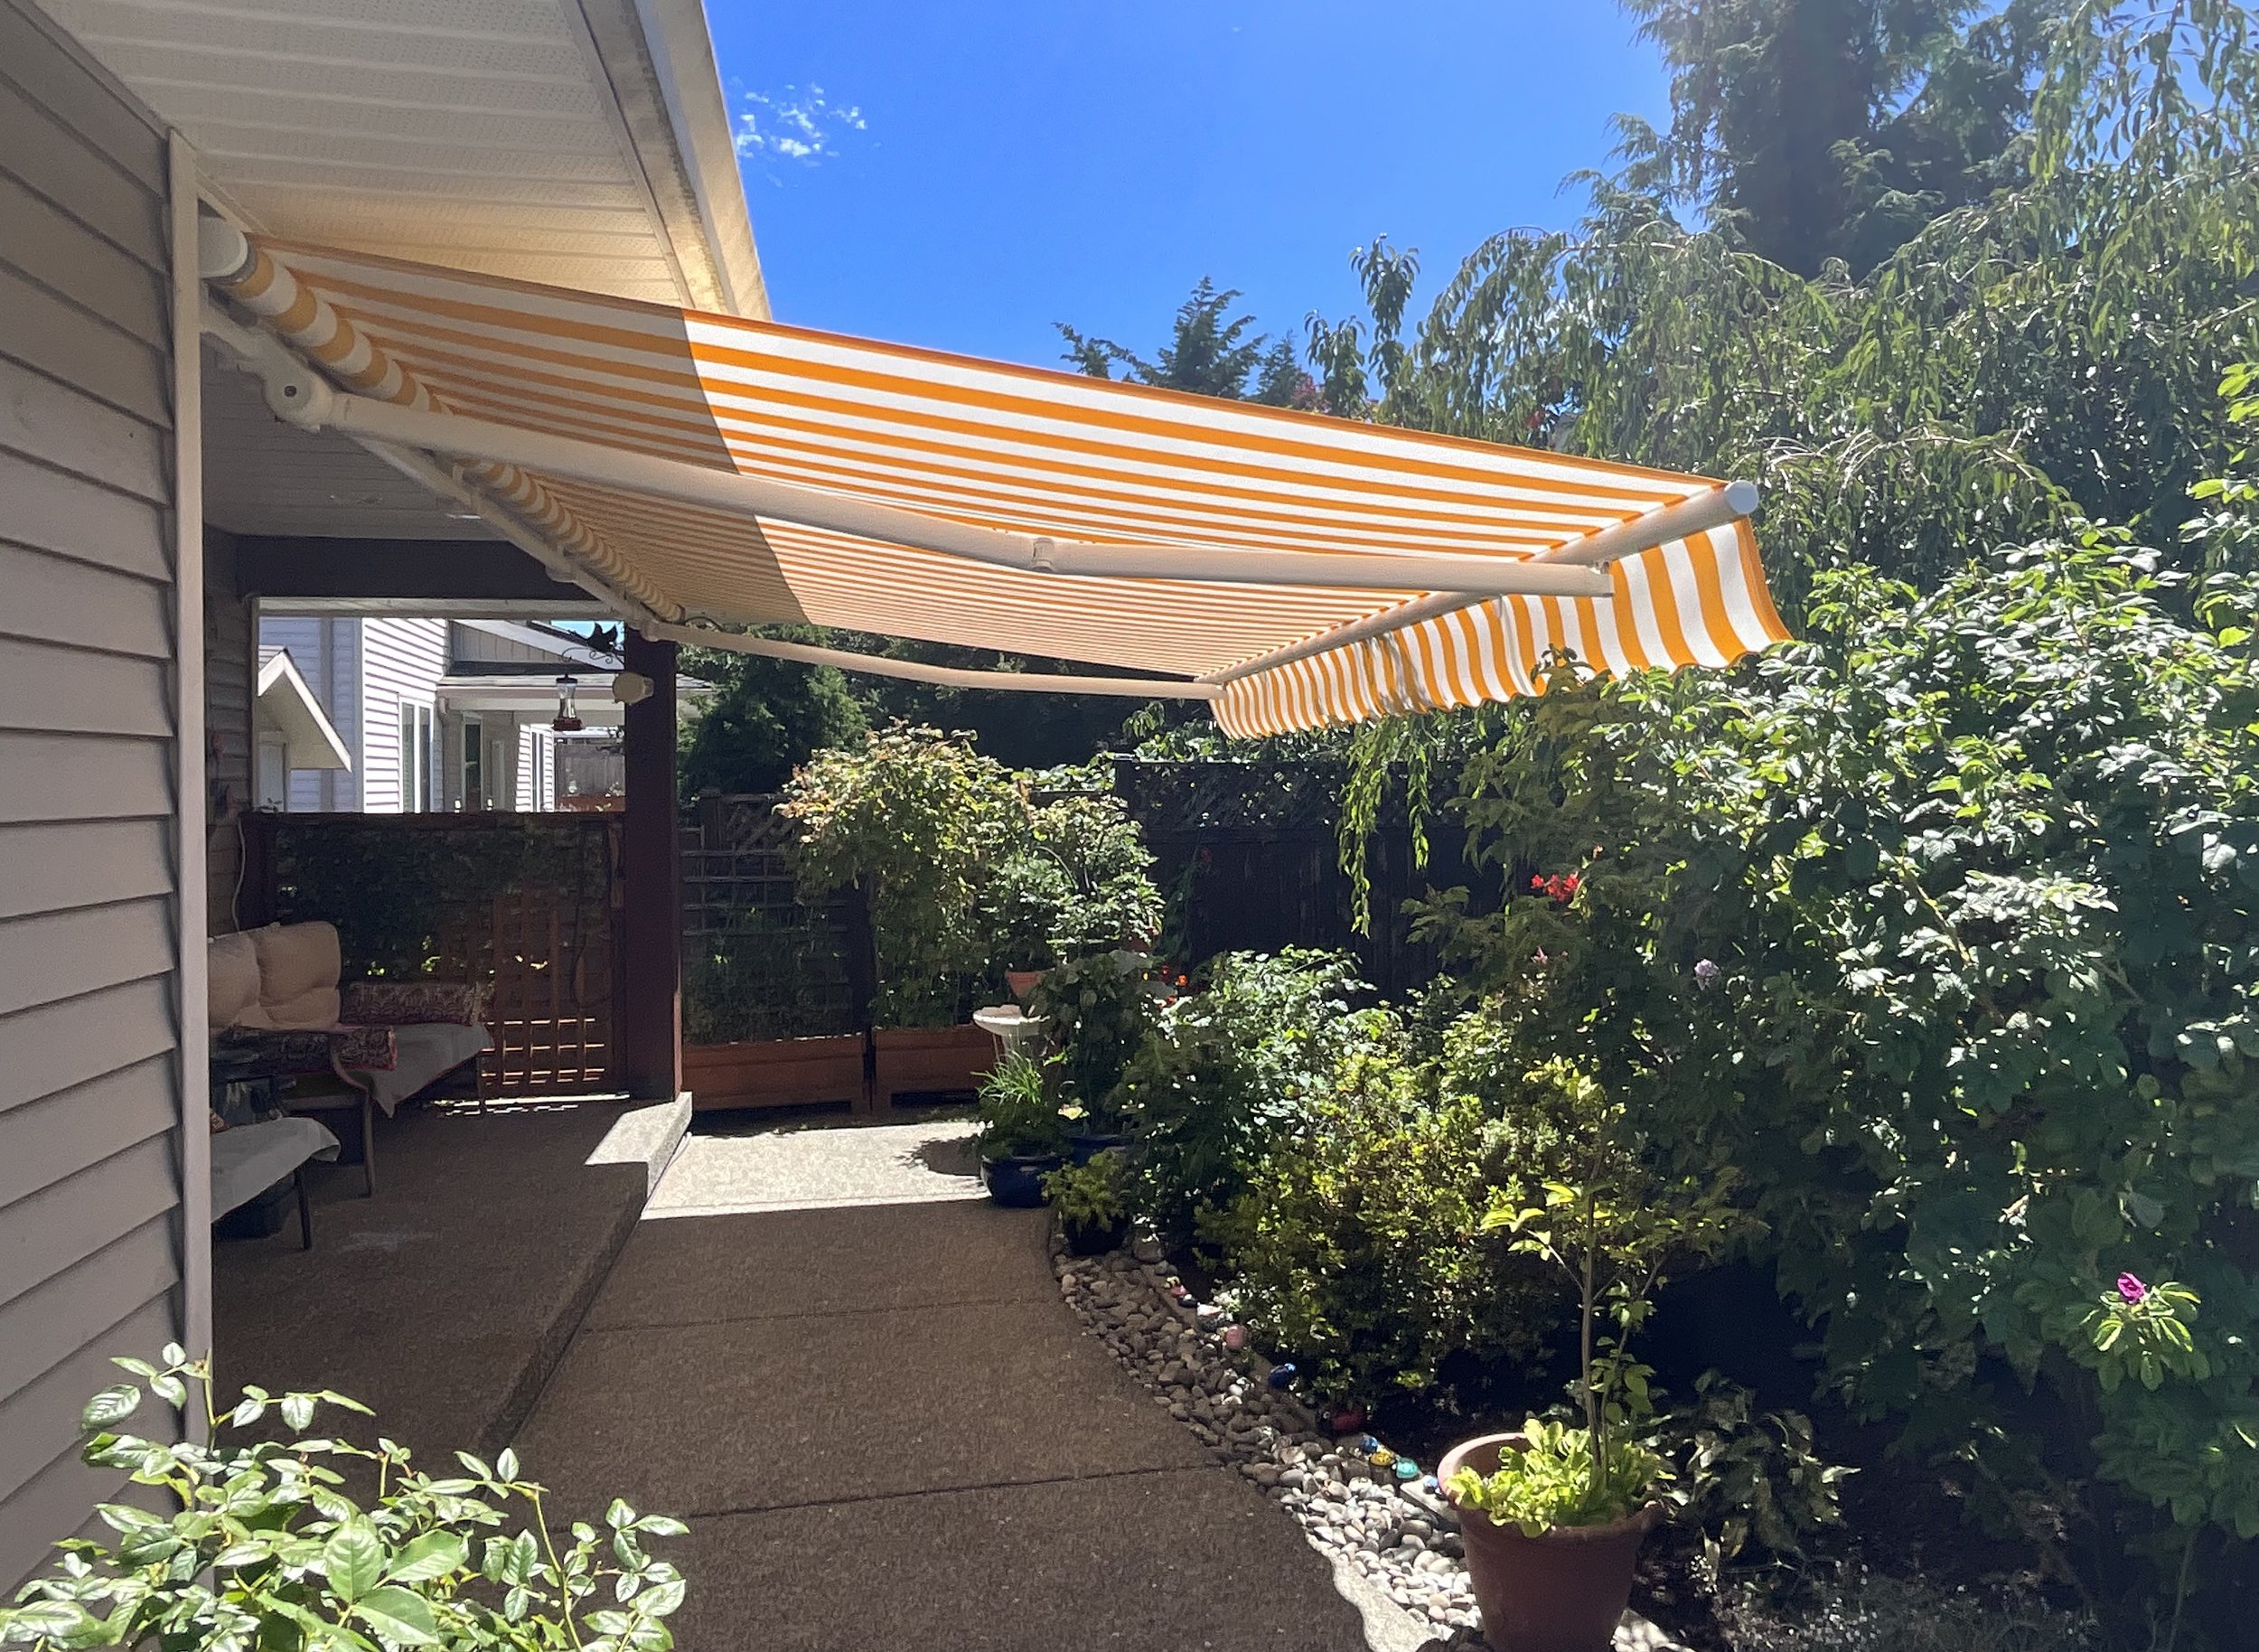 Retractable sun awning with stripes campbell river.jpg